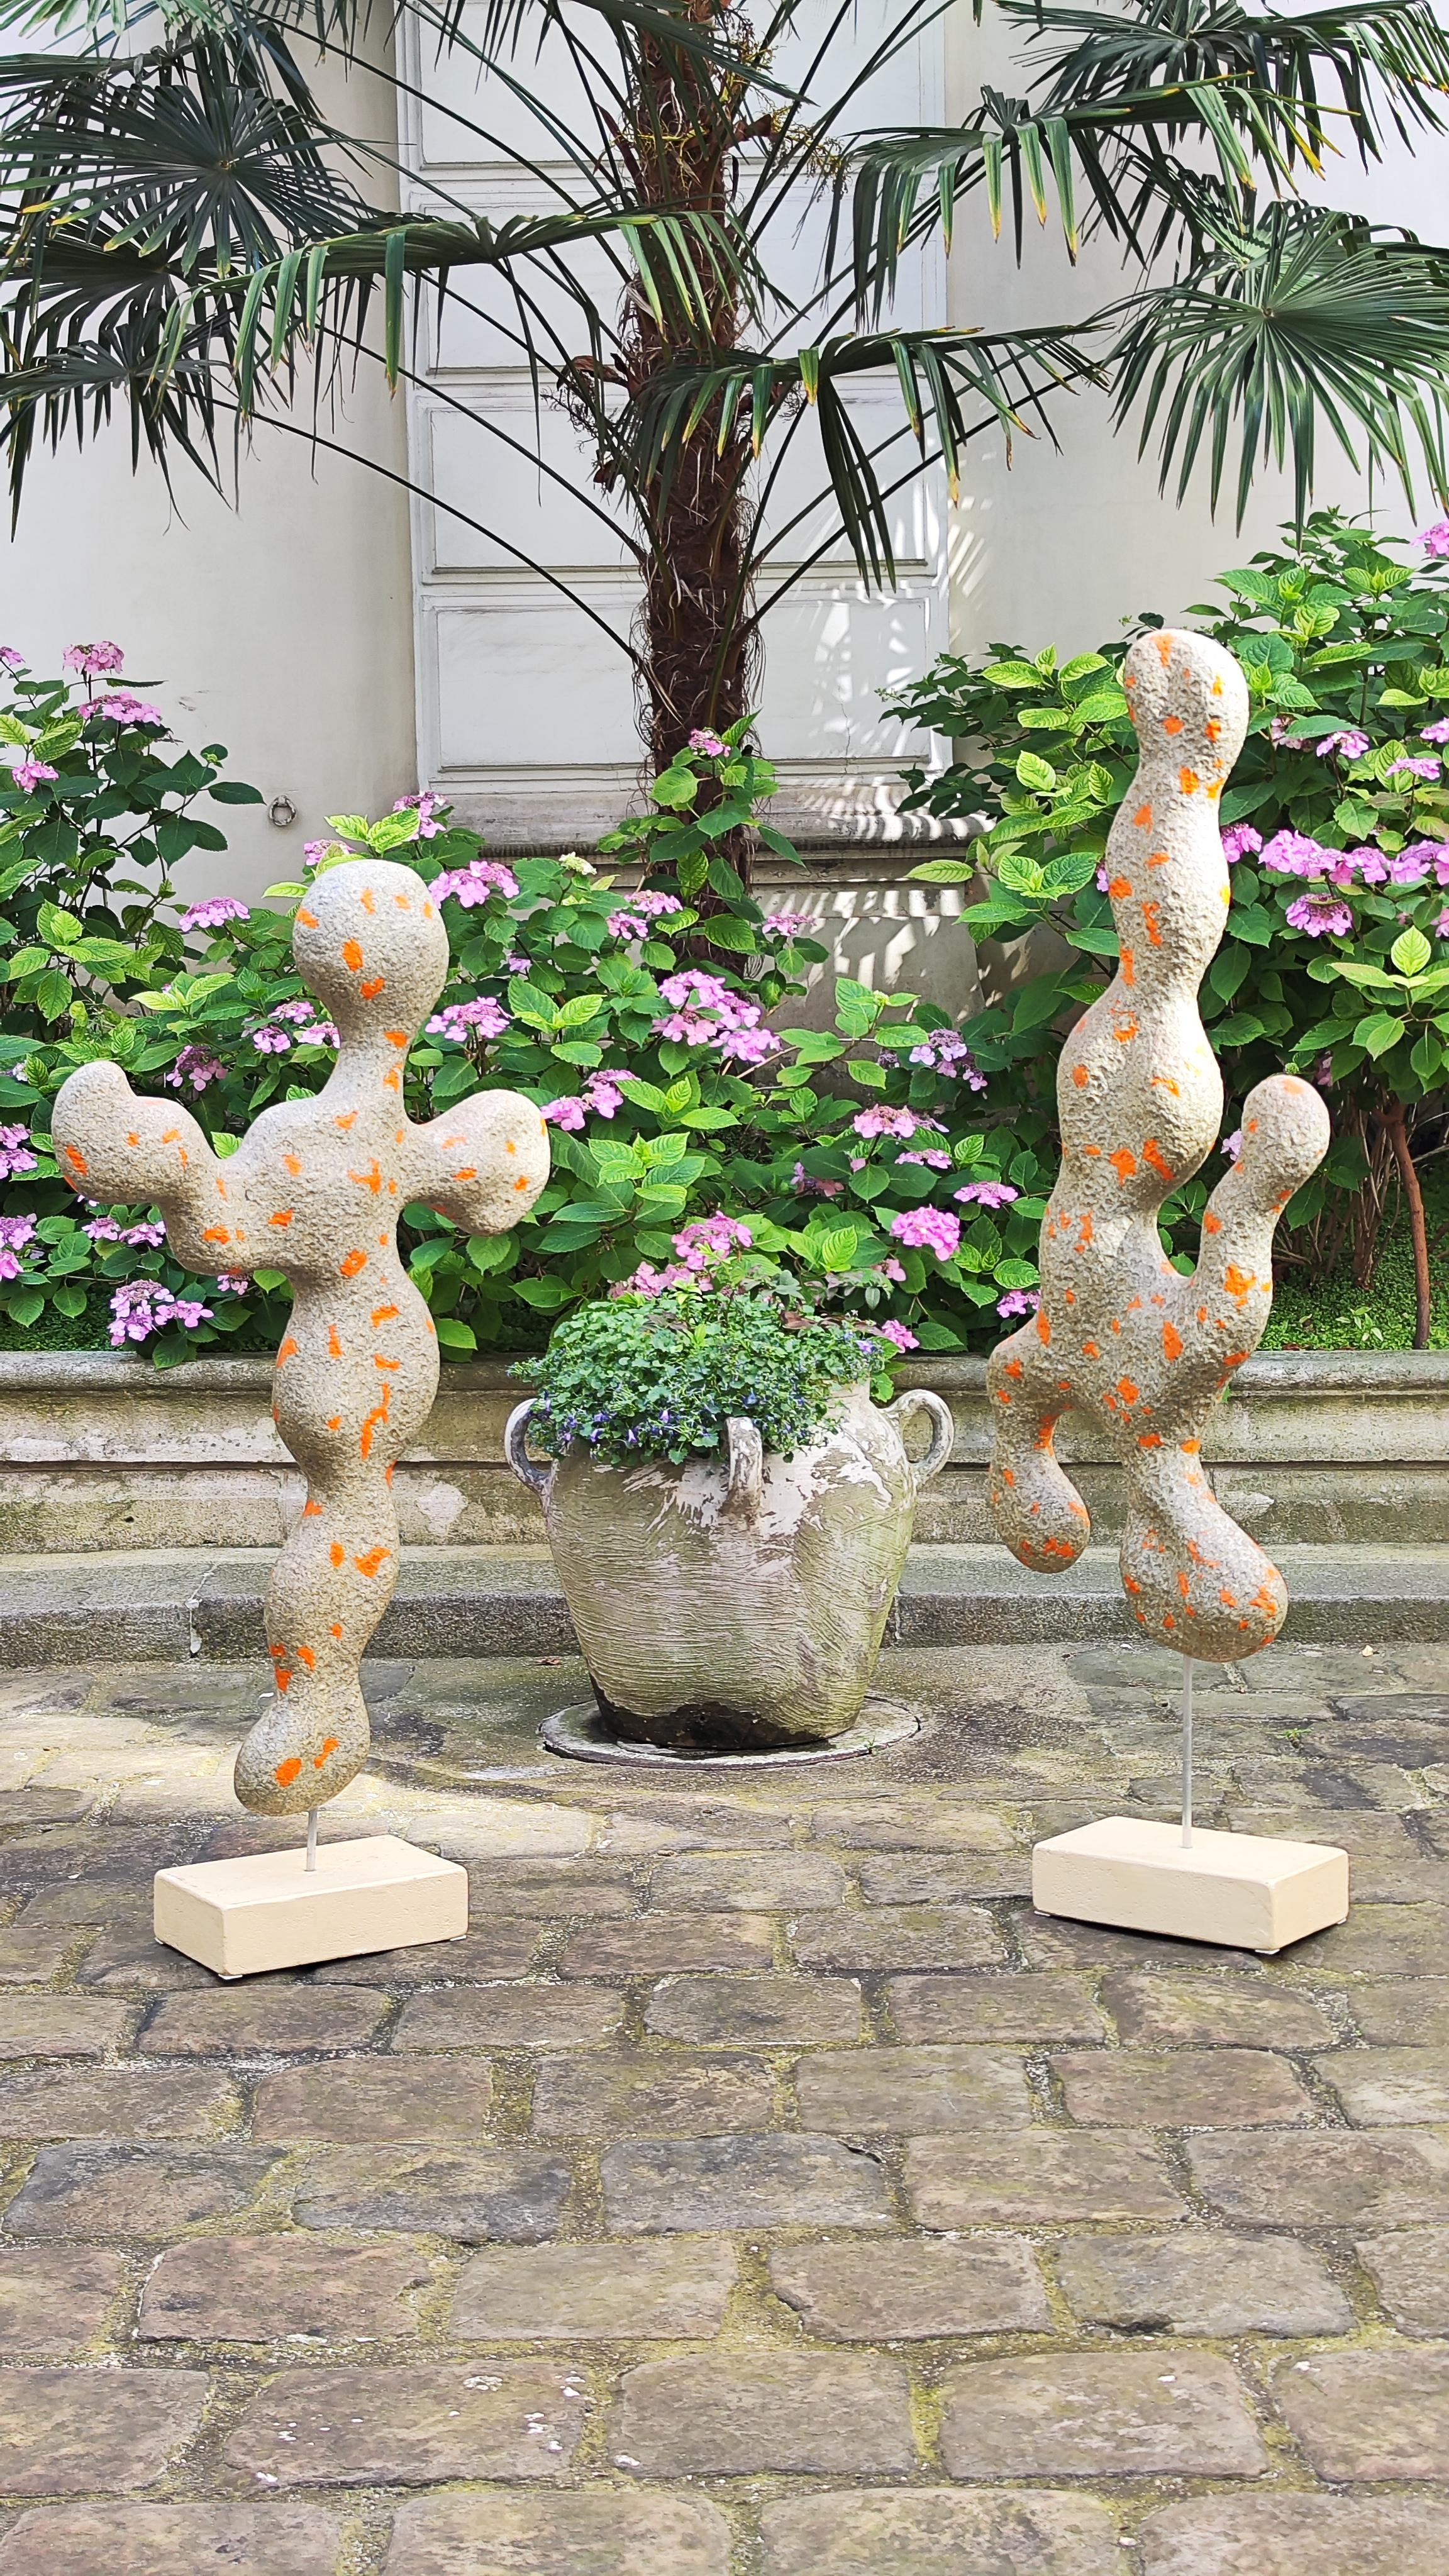 Superb pair of resin sculptures on pedestals, with rather organic shapes.
.
Abstract, illusionism, modernism and minimalism.
.
Late 70s.
.
Origine : France.
.
In the style of Jean Arp.
.
Dimensions :

1st scumpture :
145 cm tall
52 cm wide

2nd